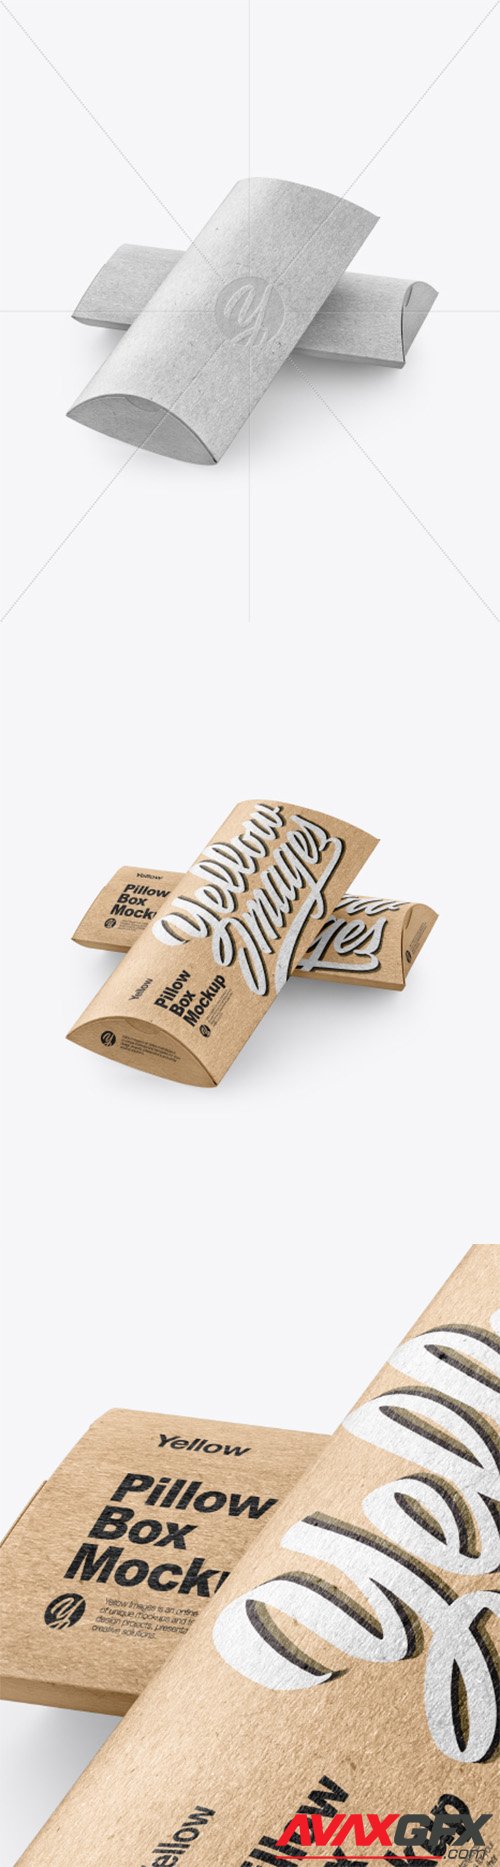 Download Two Kraft Paper Pillow Boxes Mockup 34054 Avaxgfx All Downloads That You Need In One Place Graphic From Nitroflare Rapidgator